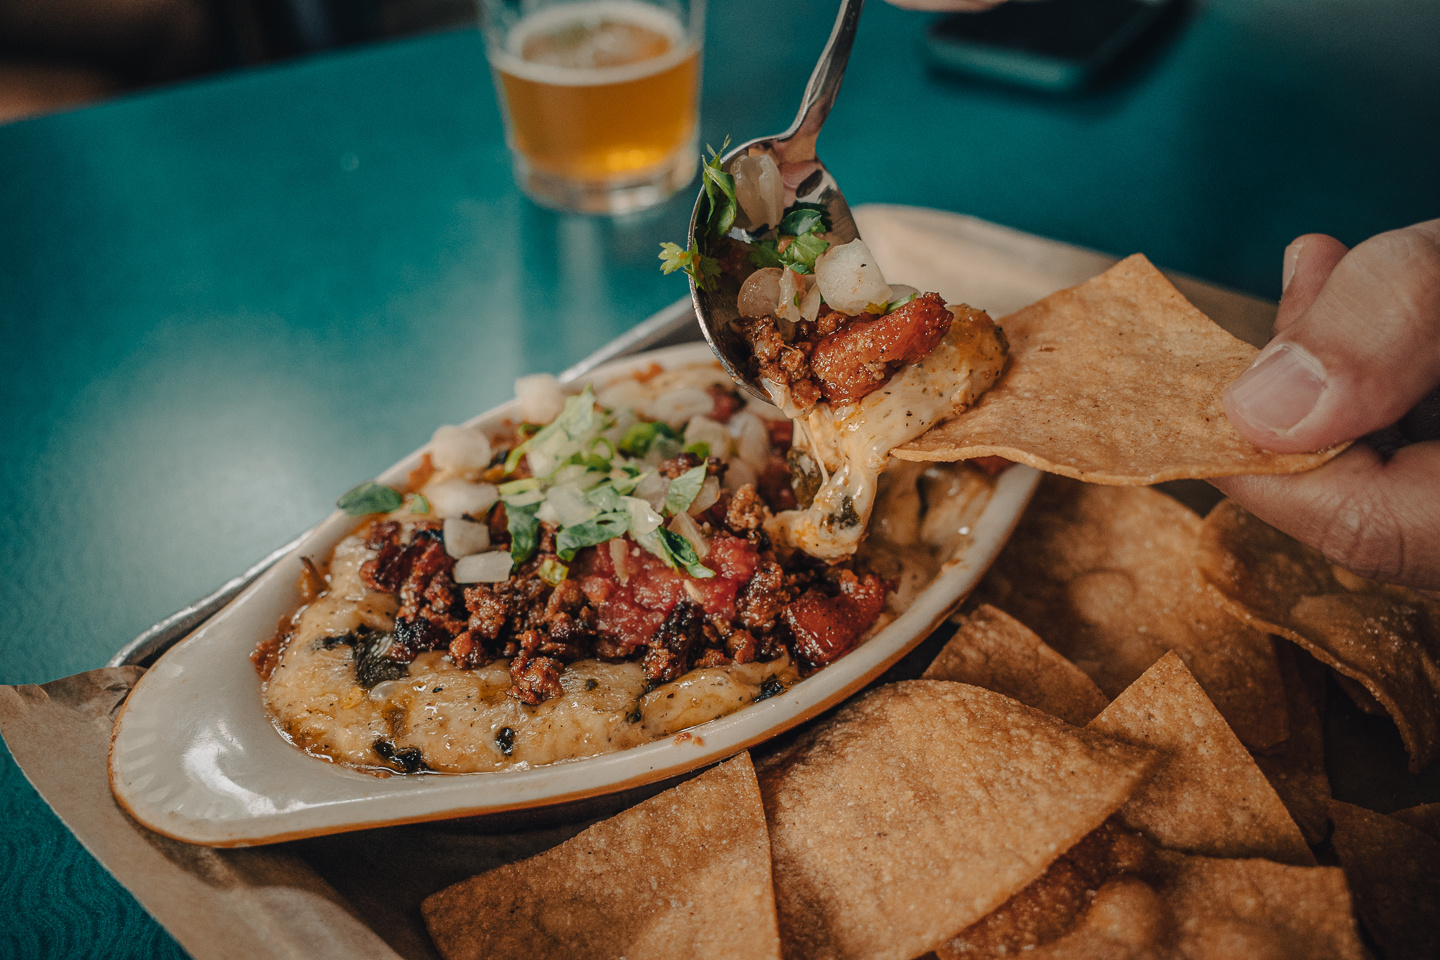 Queso Fundido at Bull Street Taco located in the Starland District Savannah, Ga